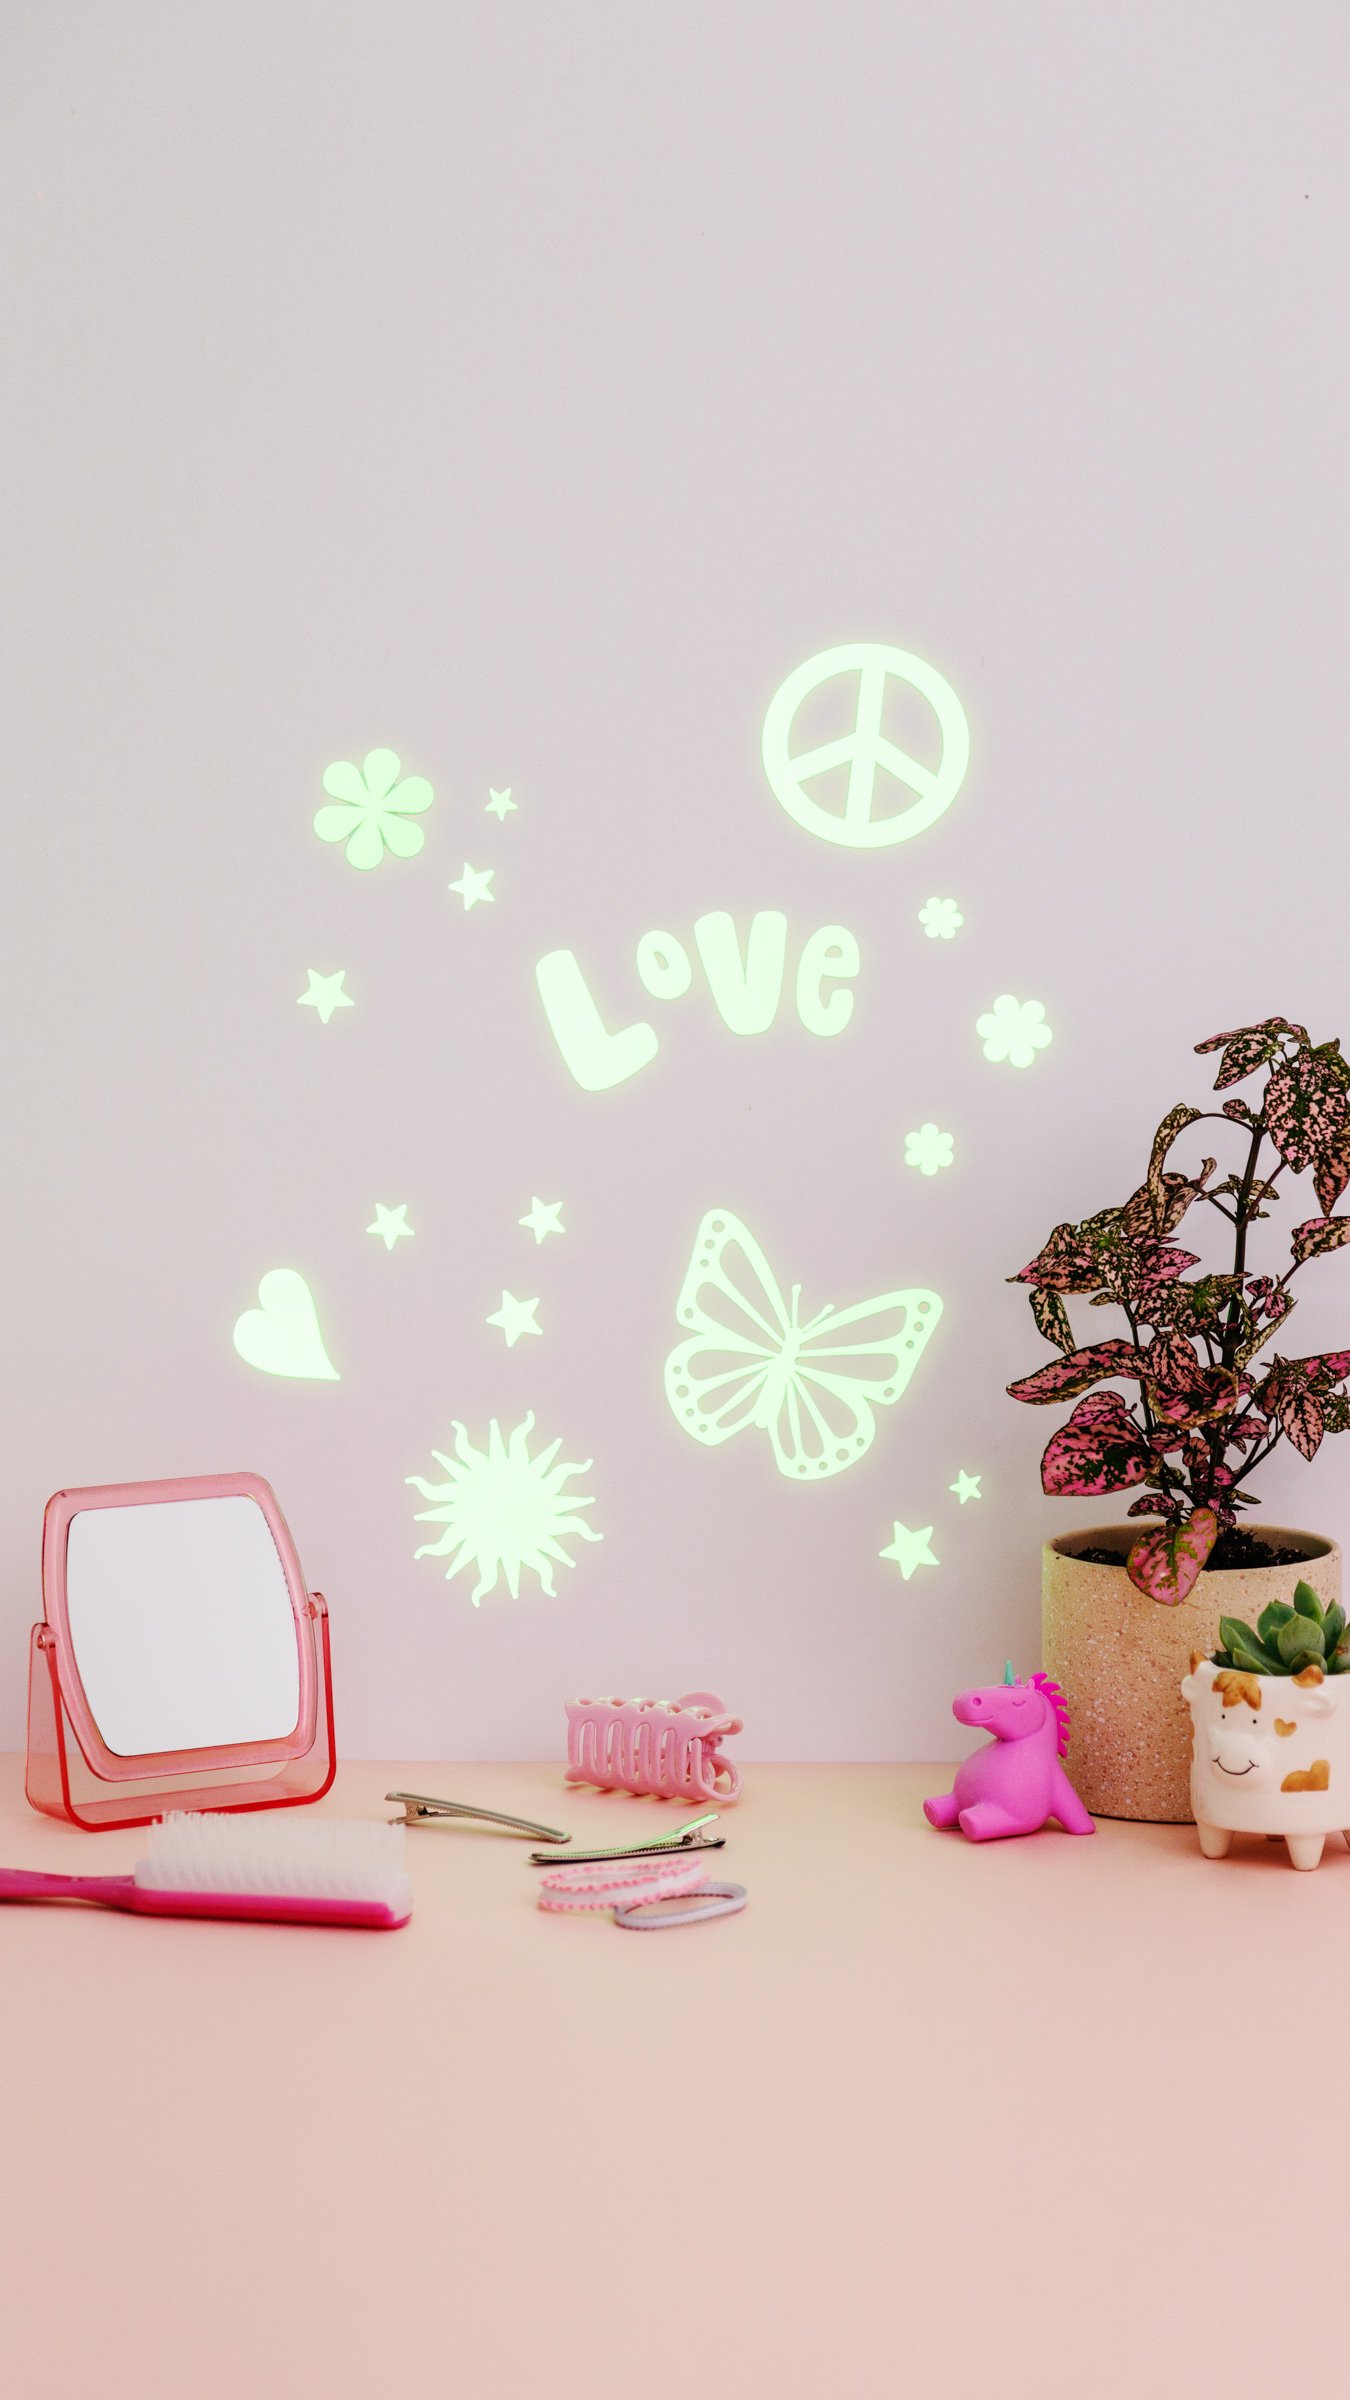 Long Lasting Ceiling Glow Stars for Boys Room, Toddler Wall Decal, Ceiling  Stars, Bedroom Stars Glow in the Dark Stars, Fun Stocking Stuffer 